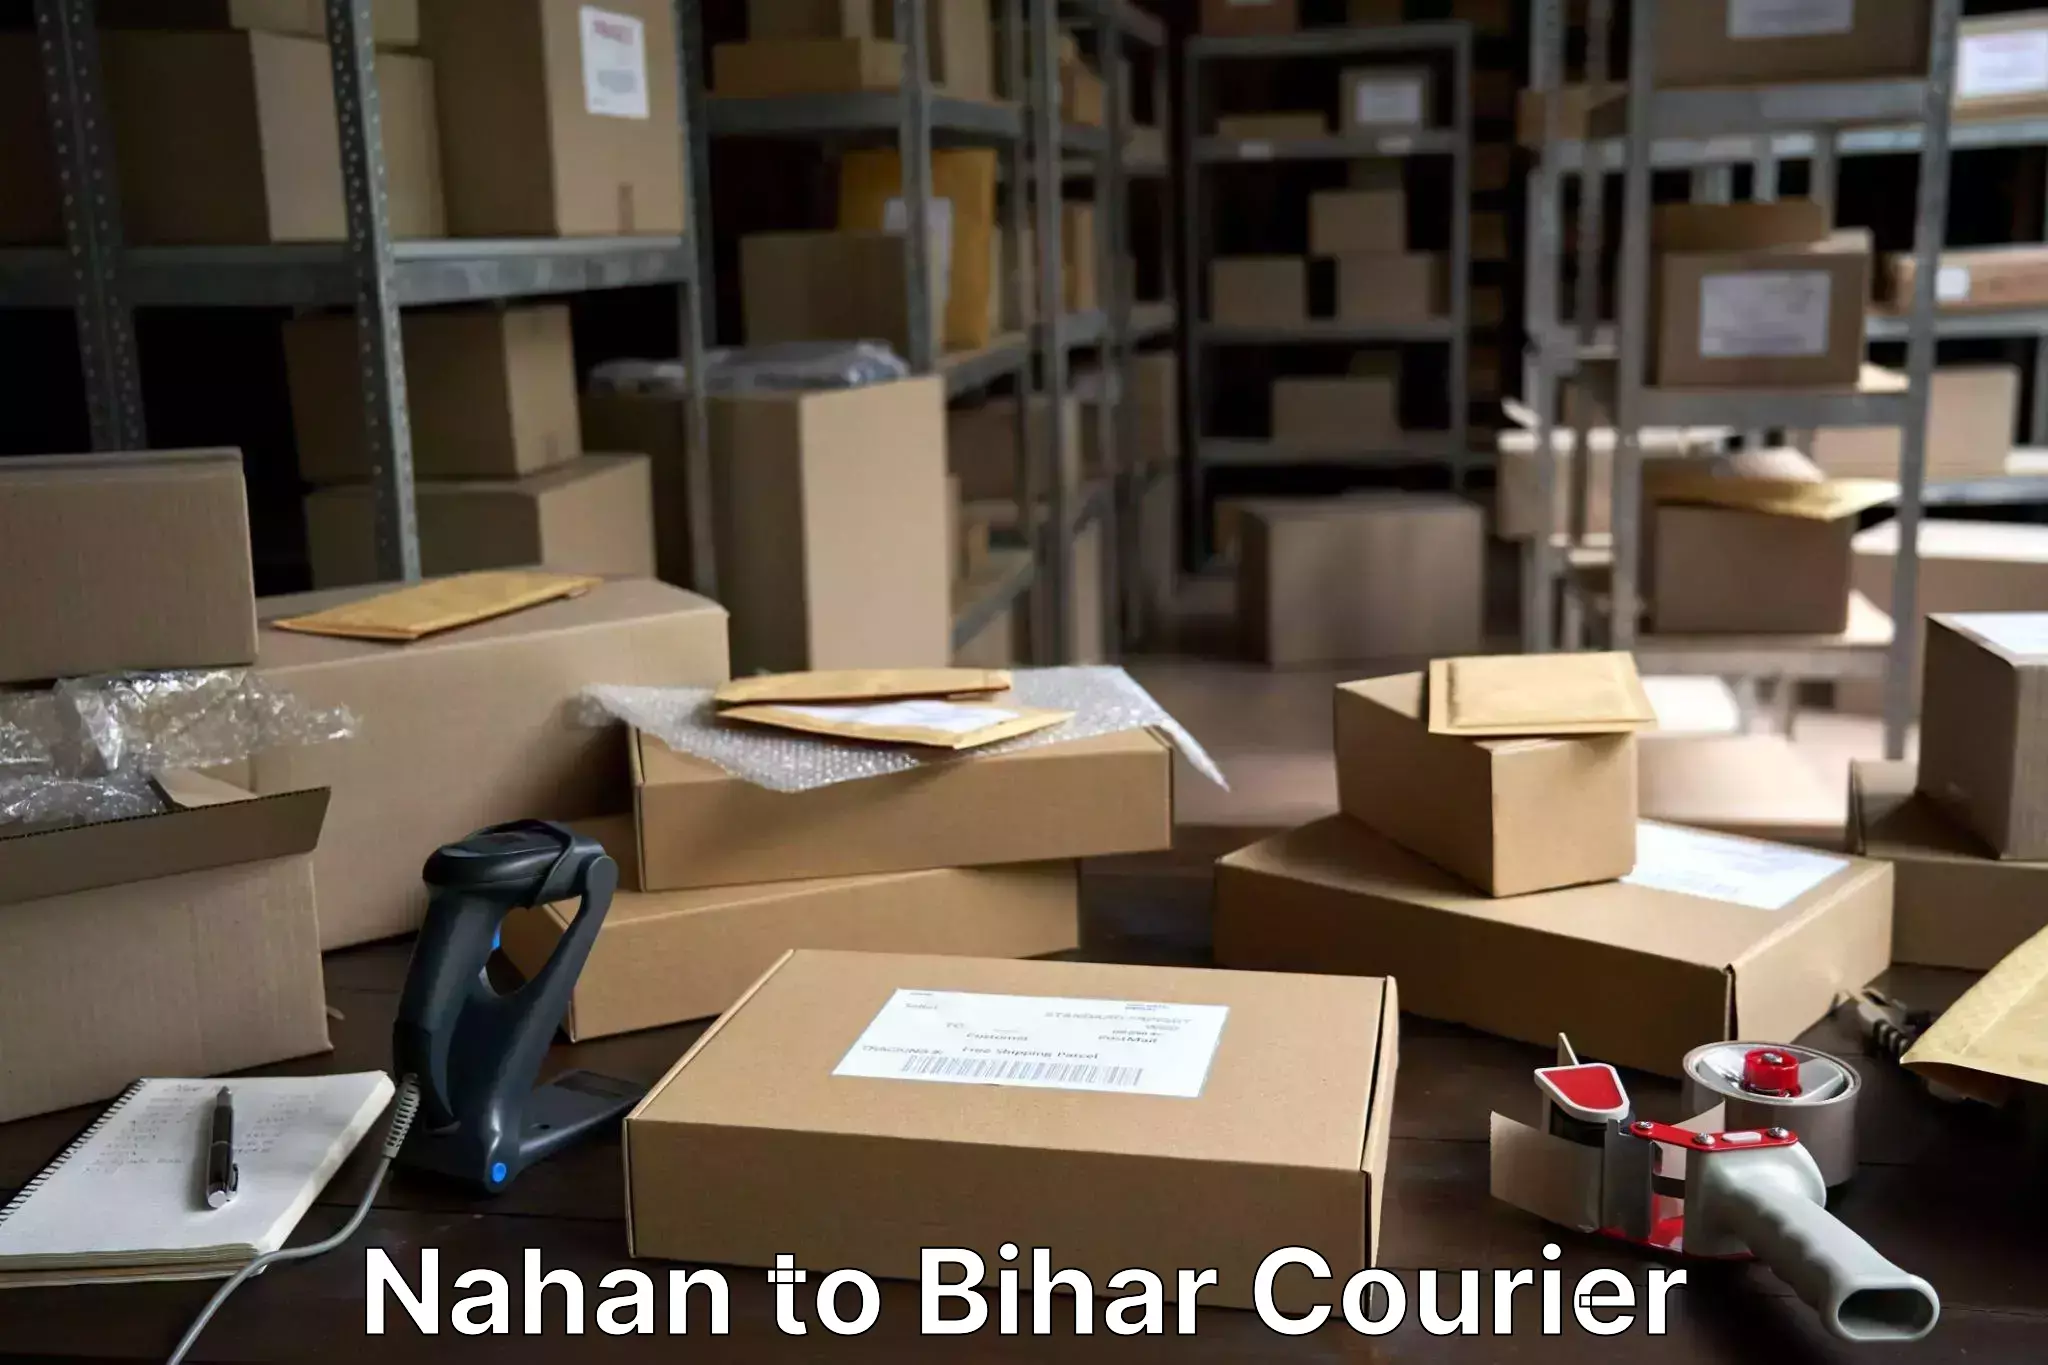 Luggage shipment specialists Nahan to Bhojpur